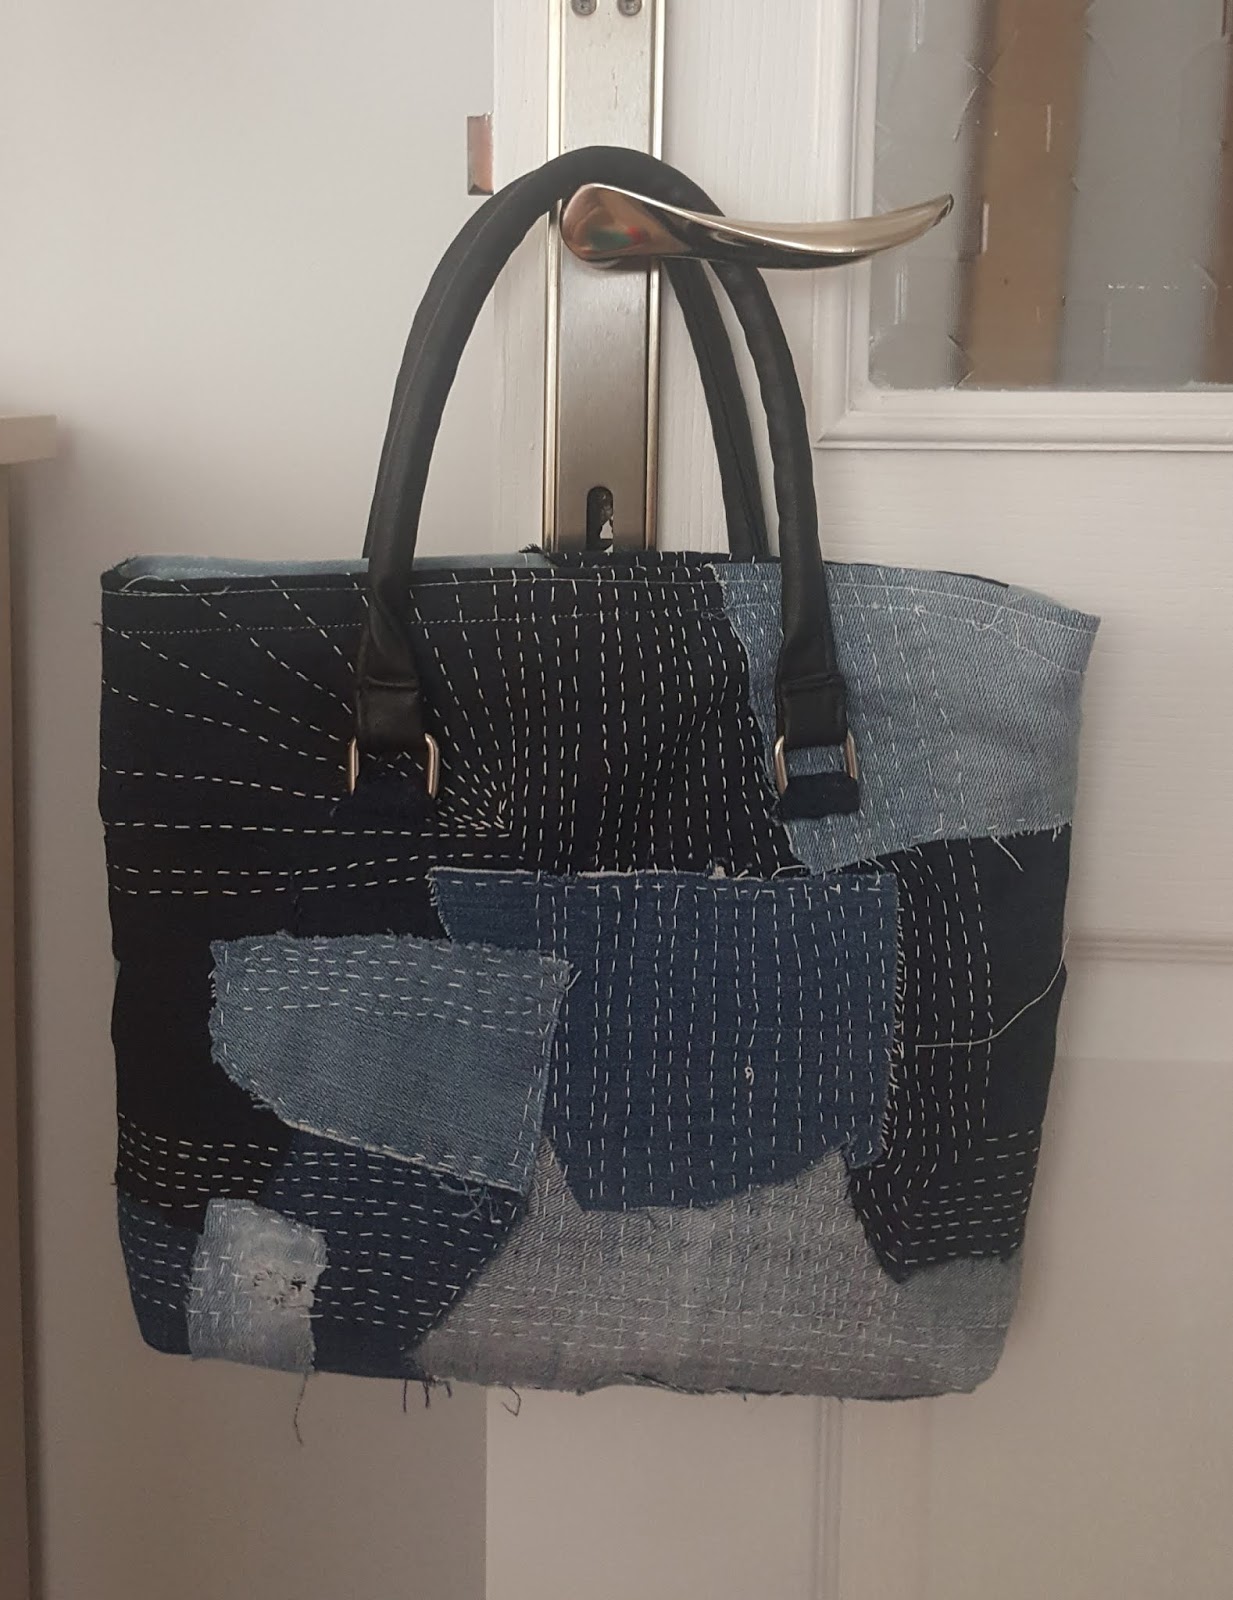 sashiko denim bag | All about patchwork and quilting